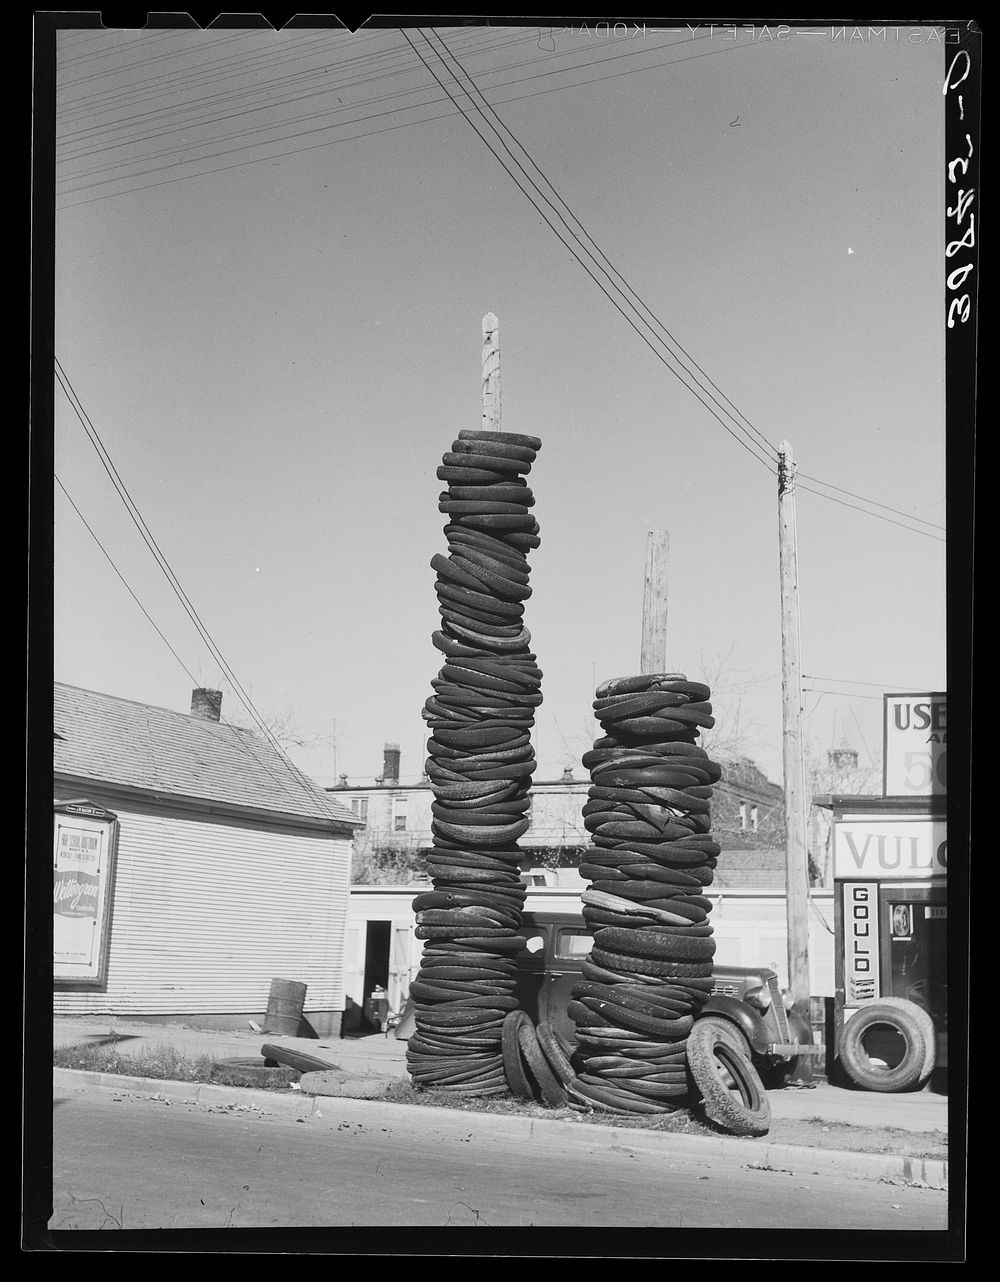 Used tires. Minot, North Dakota by Russell Lee